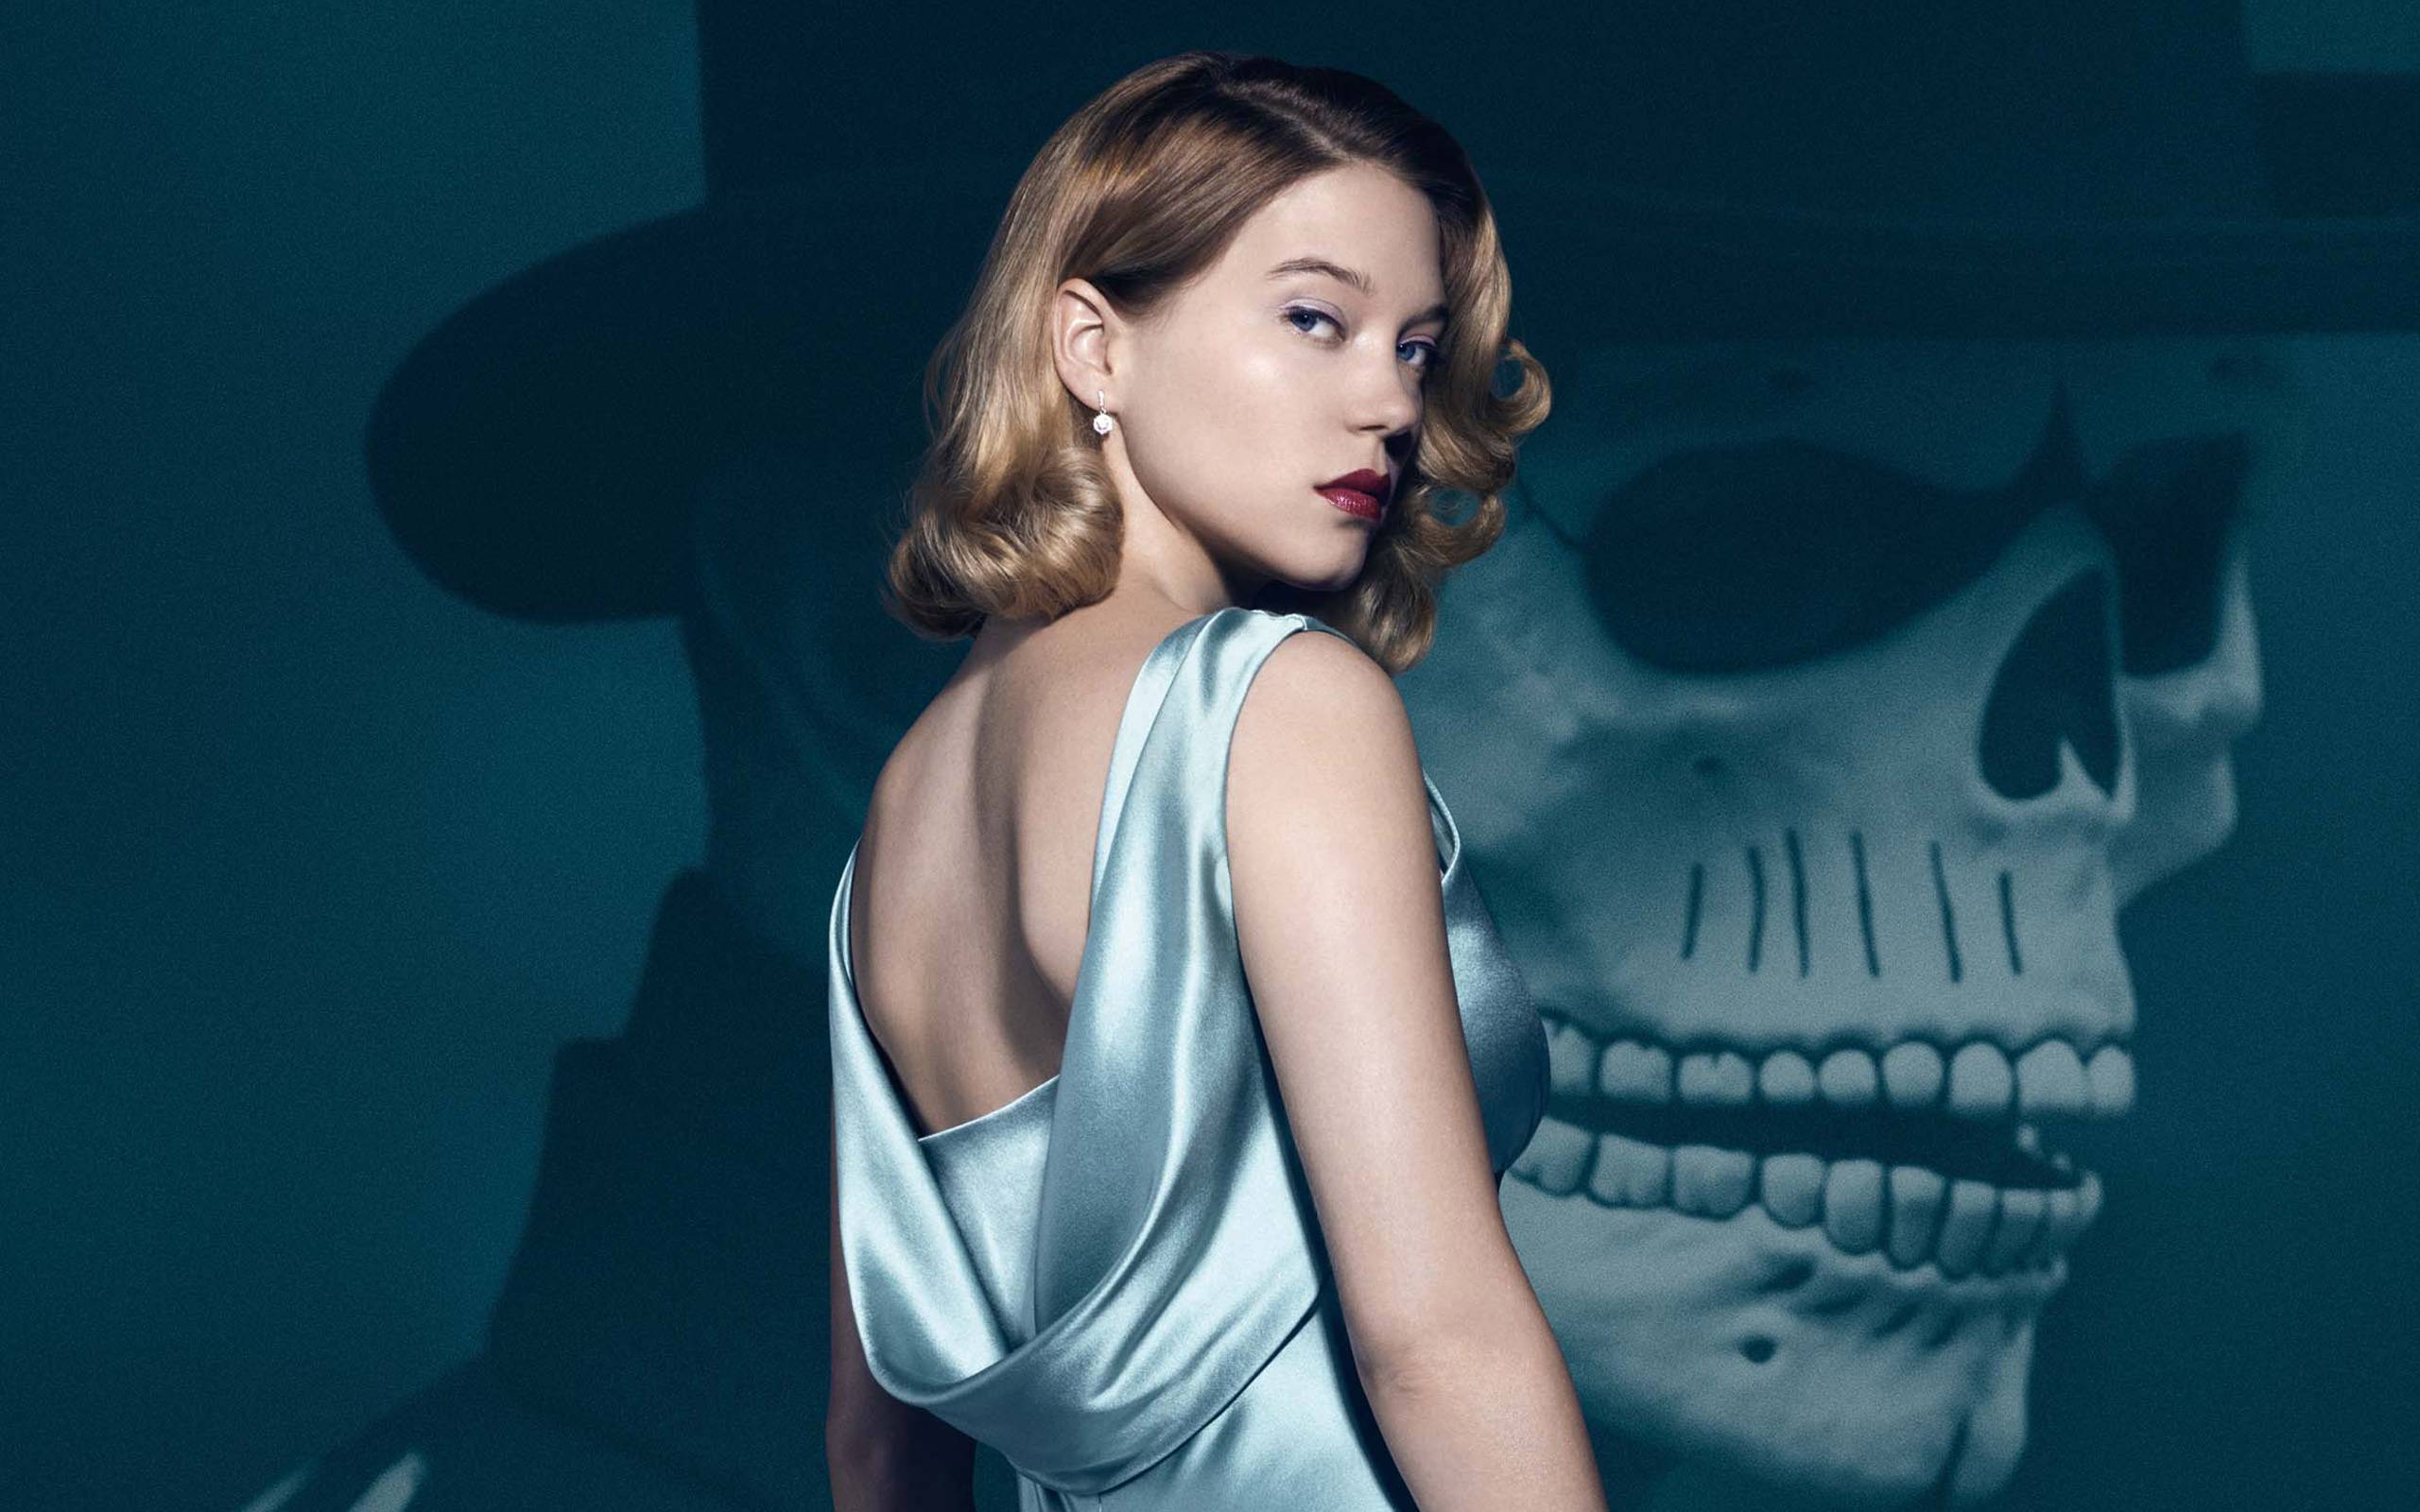 Lea Seydoux Is New Bond Girl in Spectre: What to Know